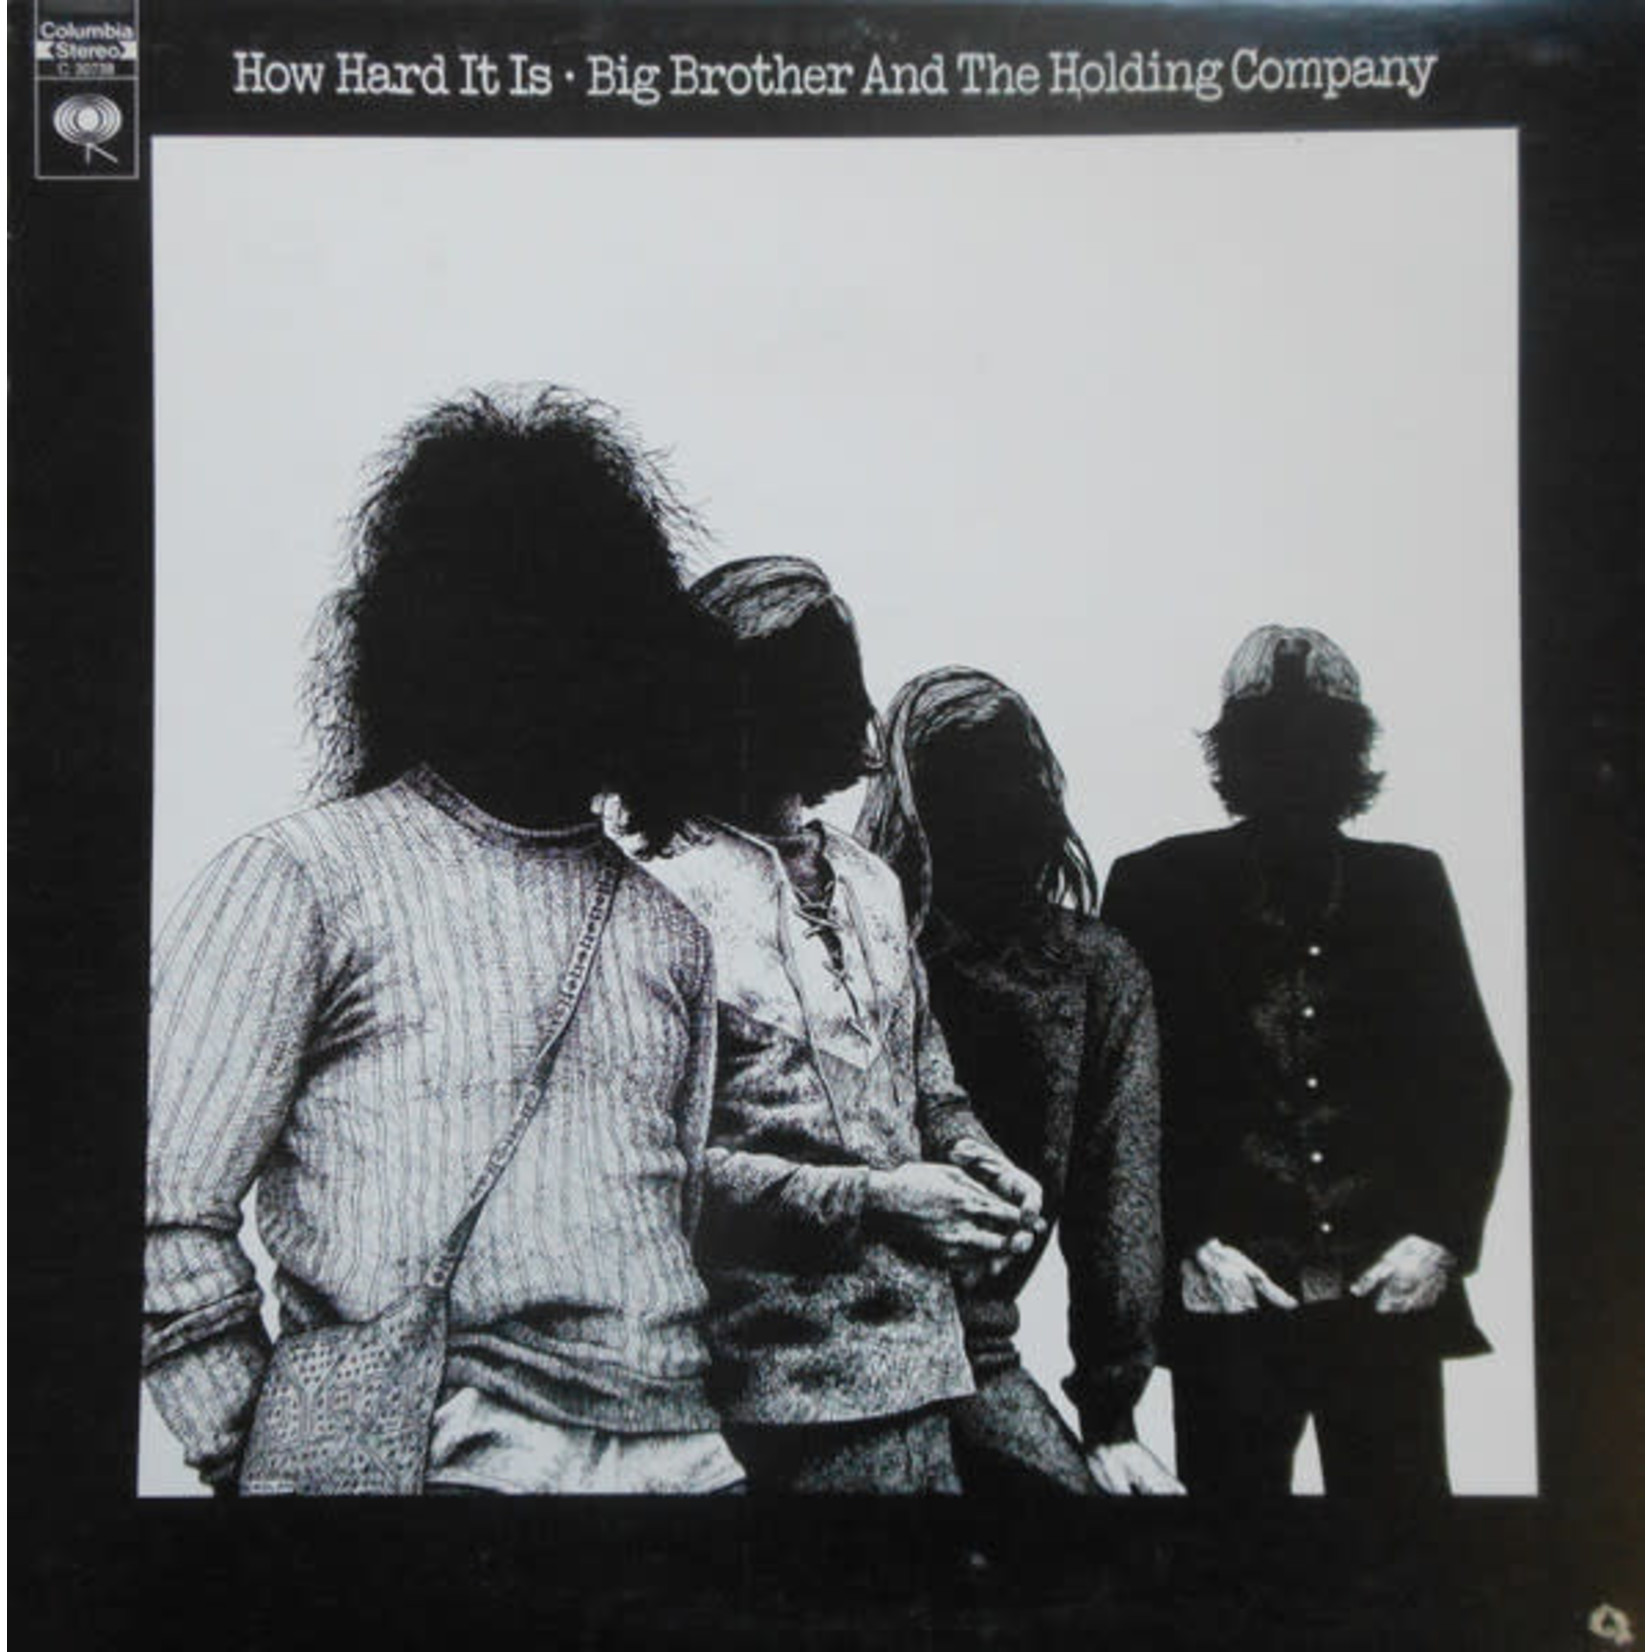 [Vintage] Big Brother & the Holding Company (Janis Joplin) - How Hard It Is